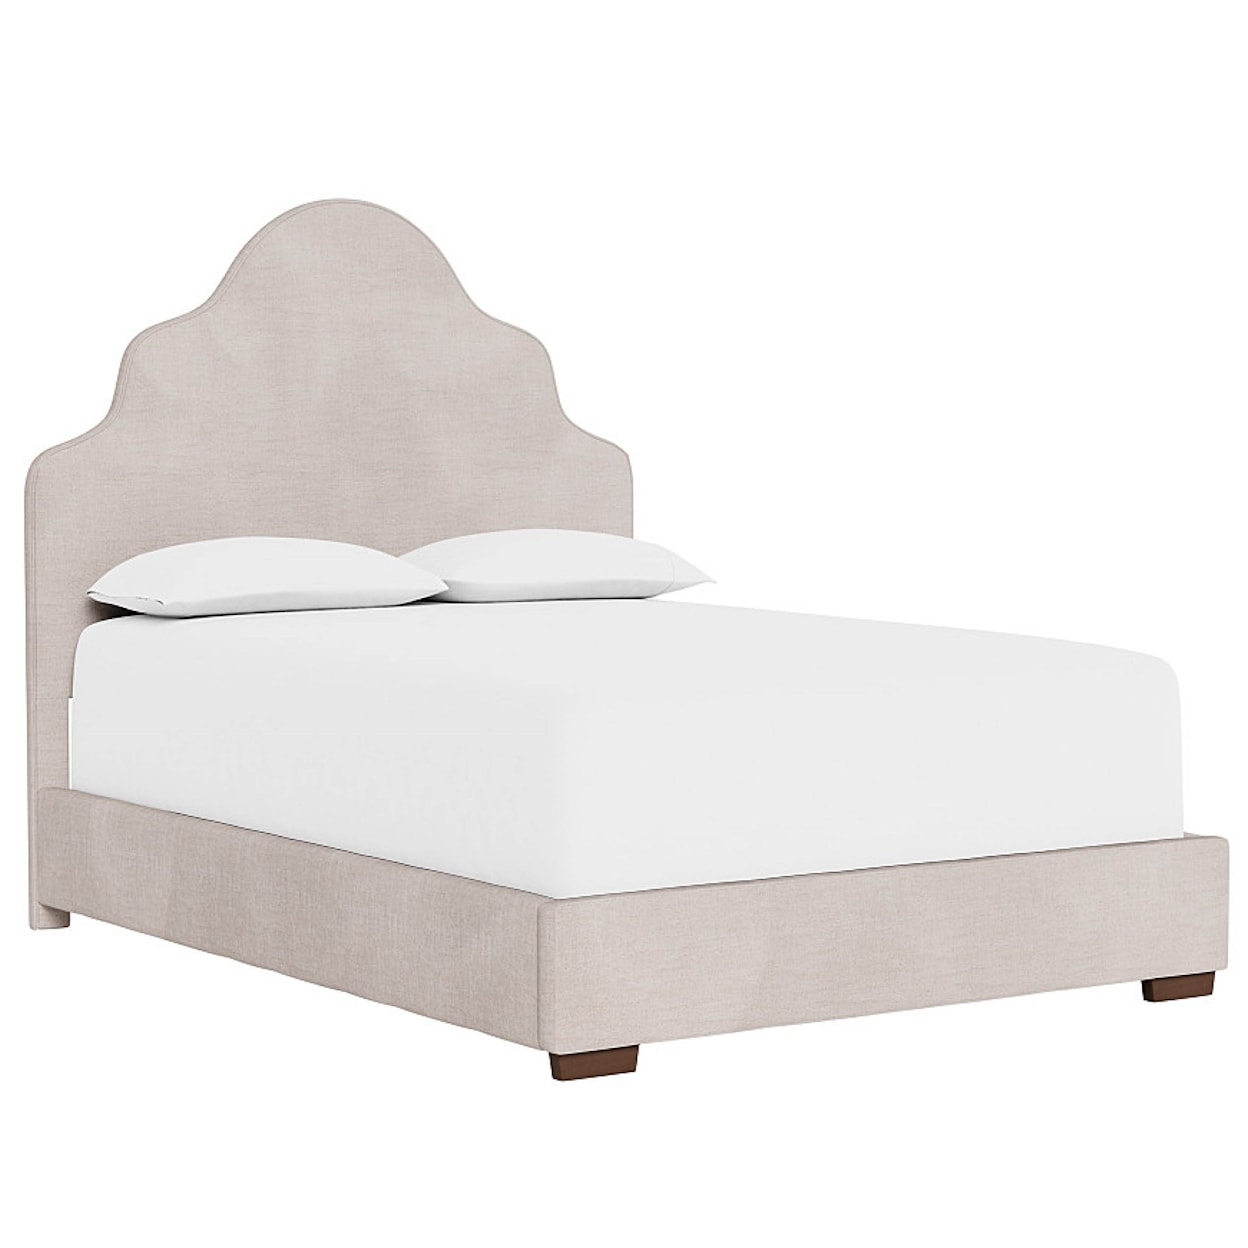 Universal Special Order King Sagamore Hill Bed